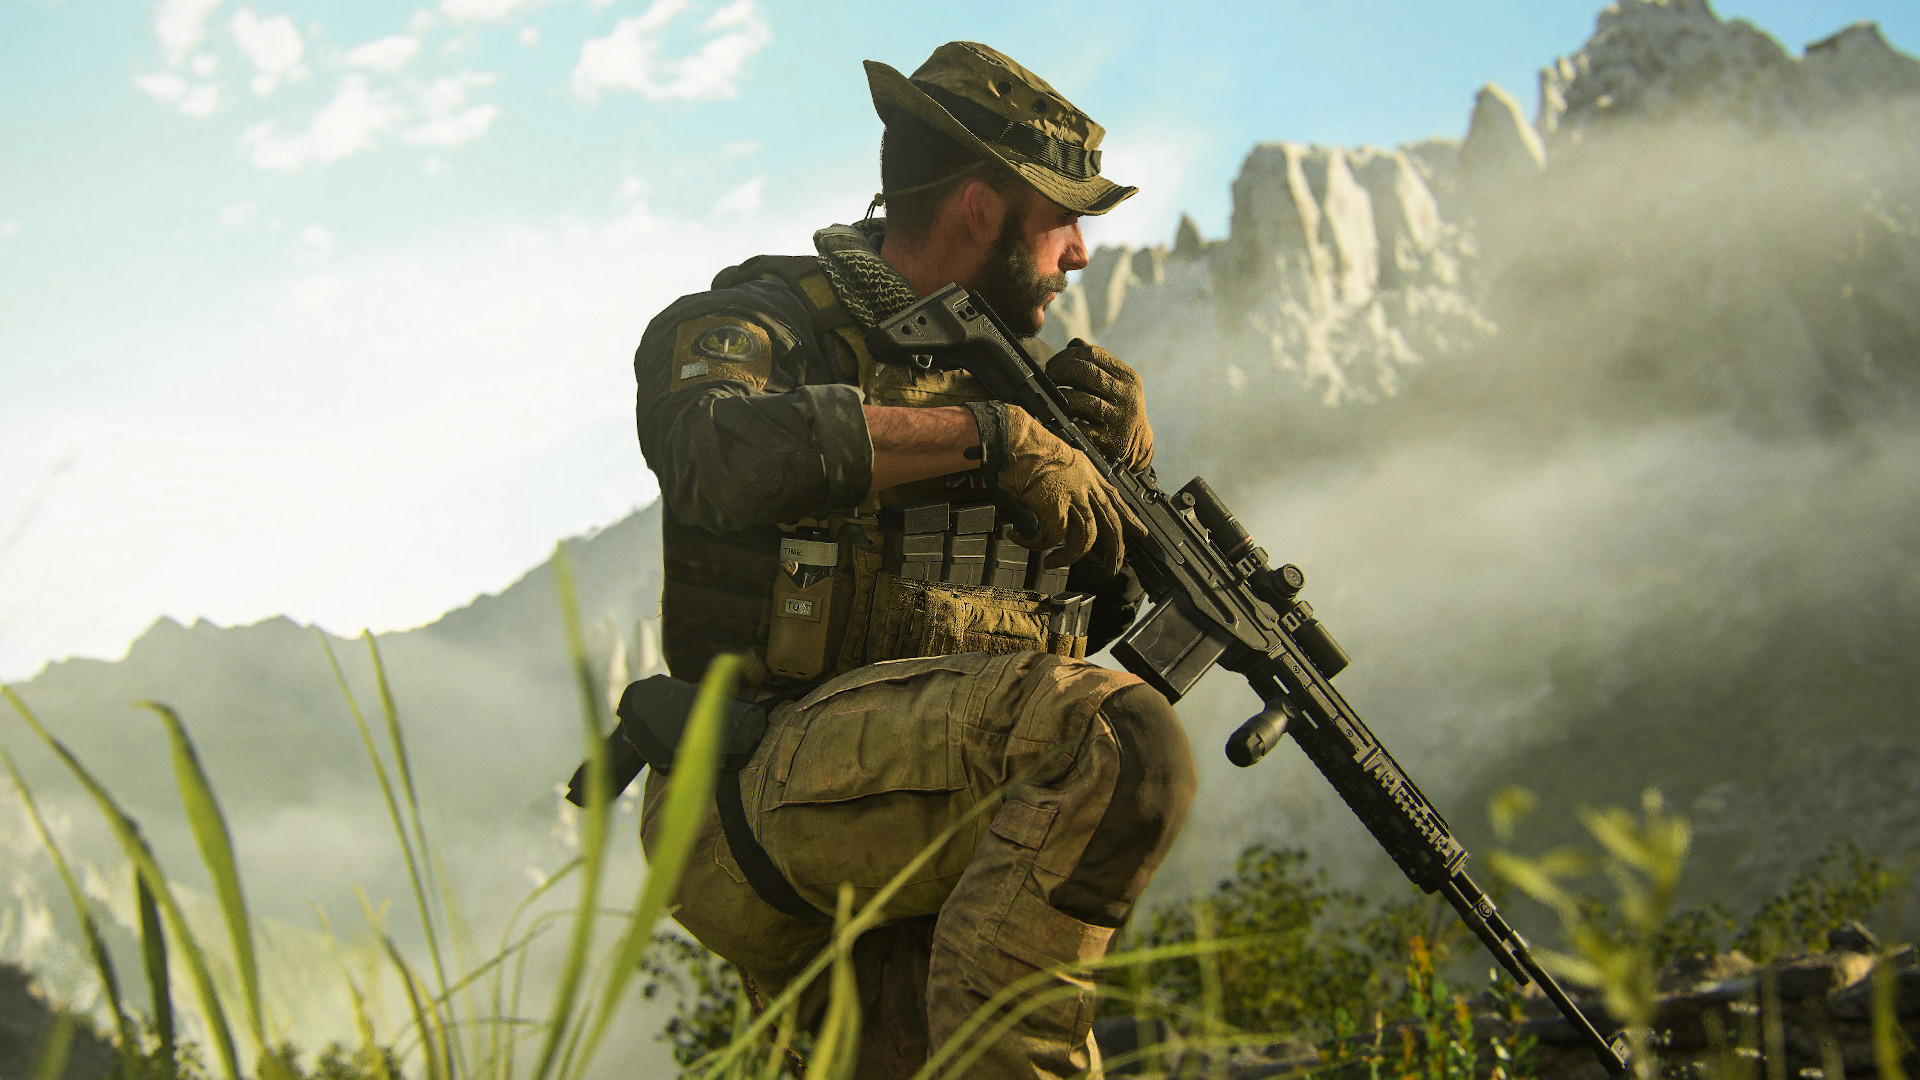 Call of Duty: Modern Warfare III hogs up to 213GB of storage space and doesn’t care if you want to play other games